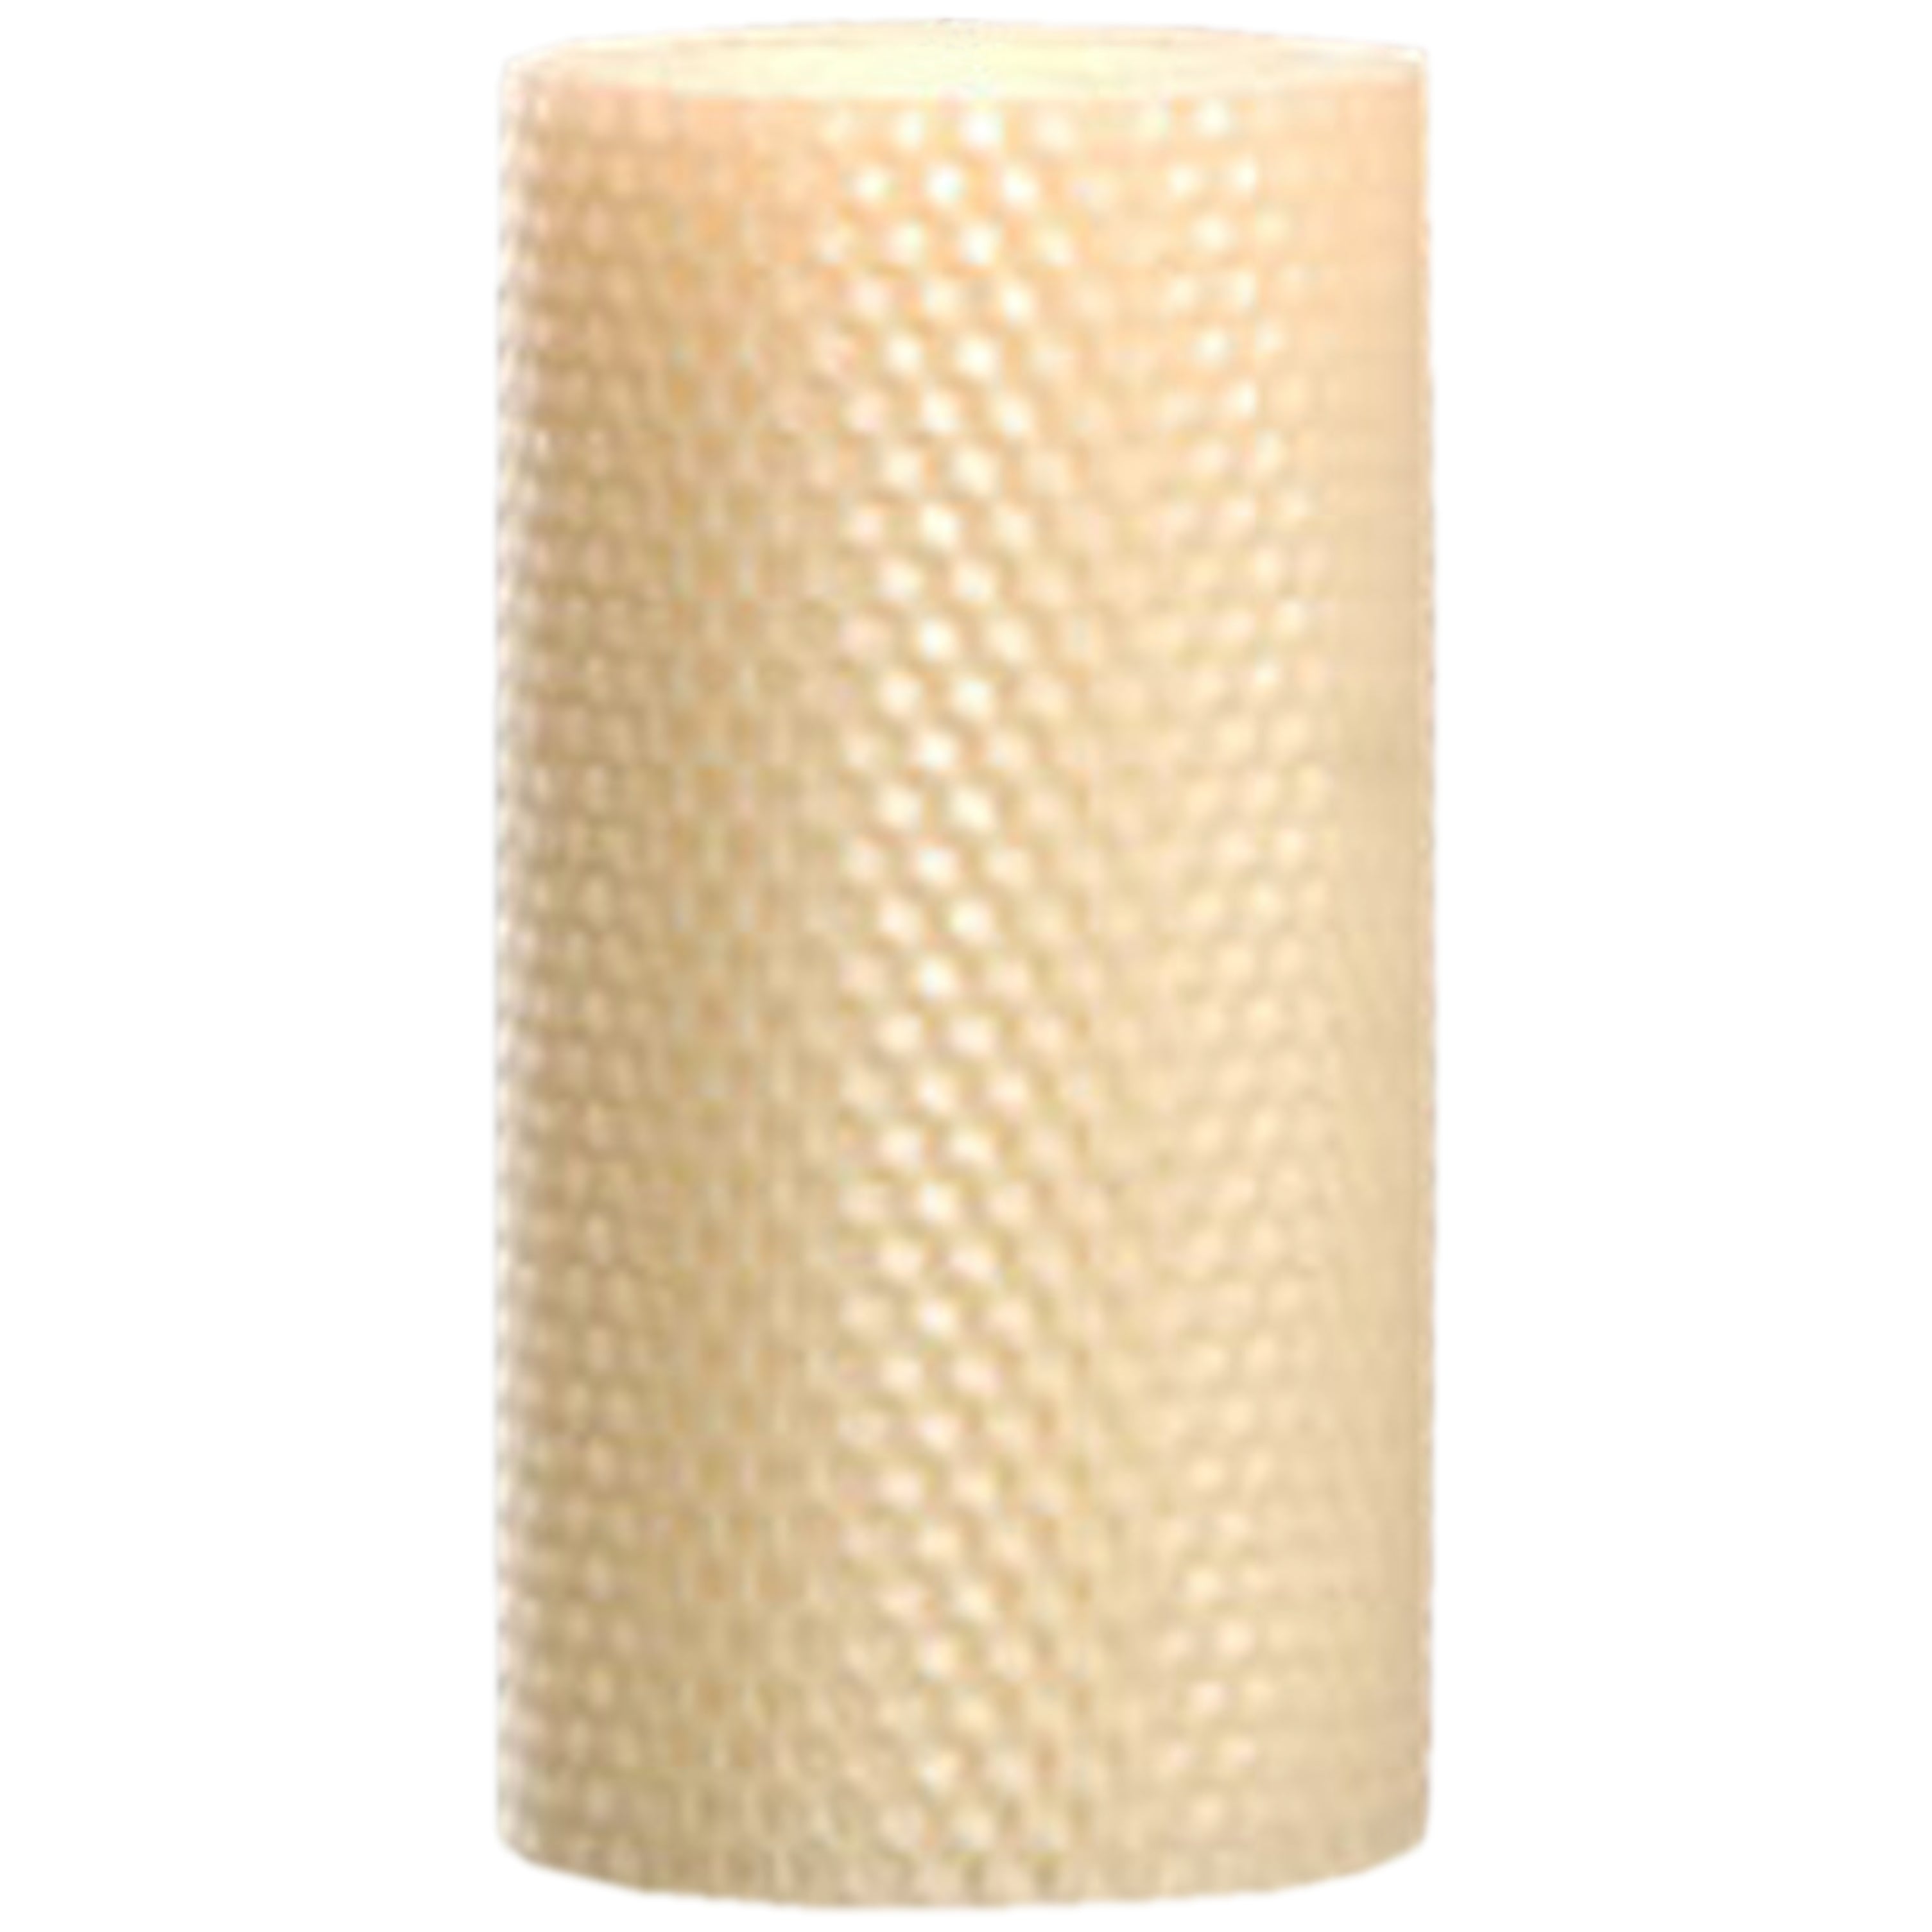 Dadant Rolled Beeswax Pillar Candle – 3 x 6"